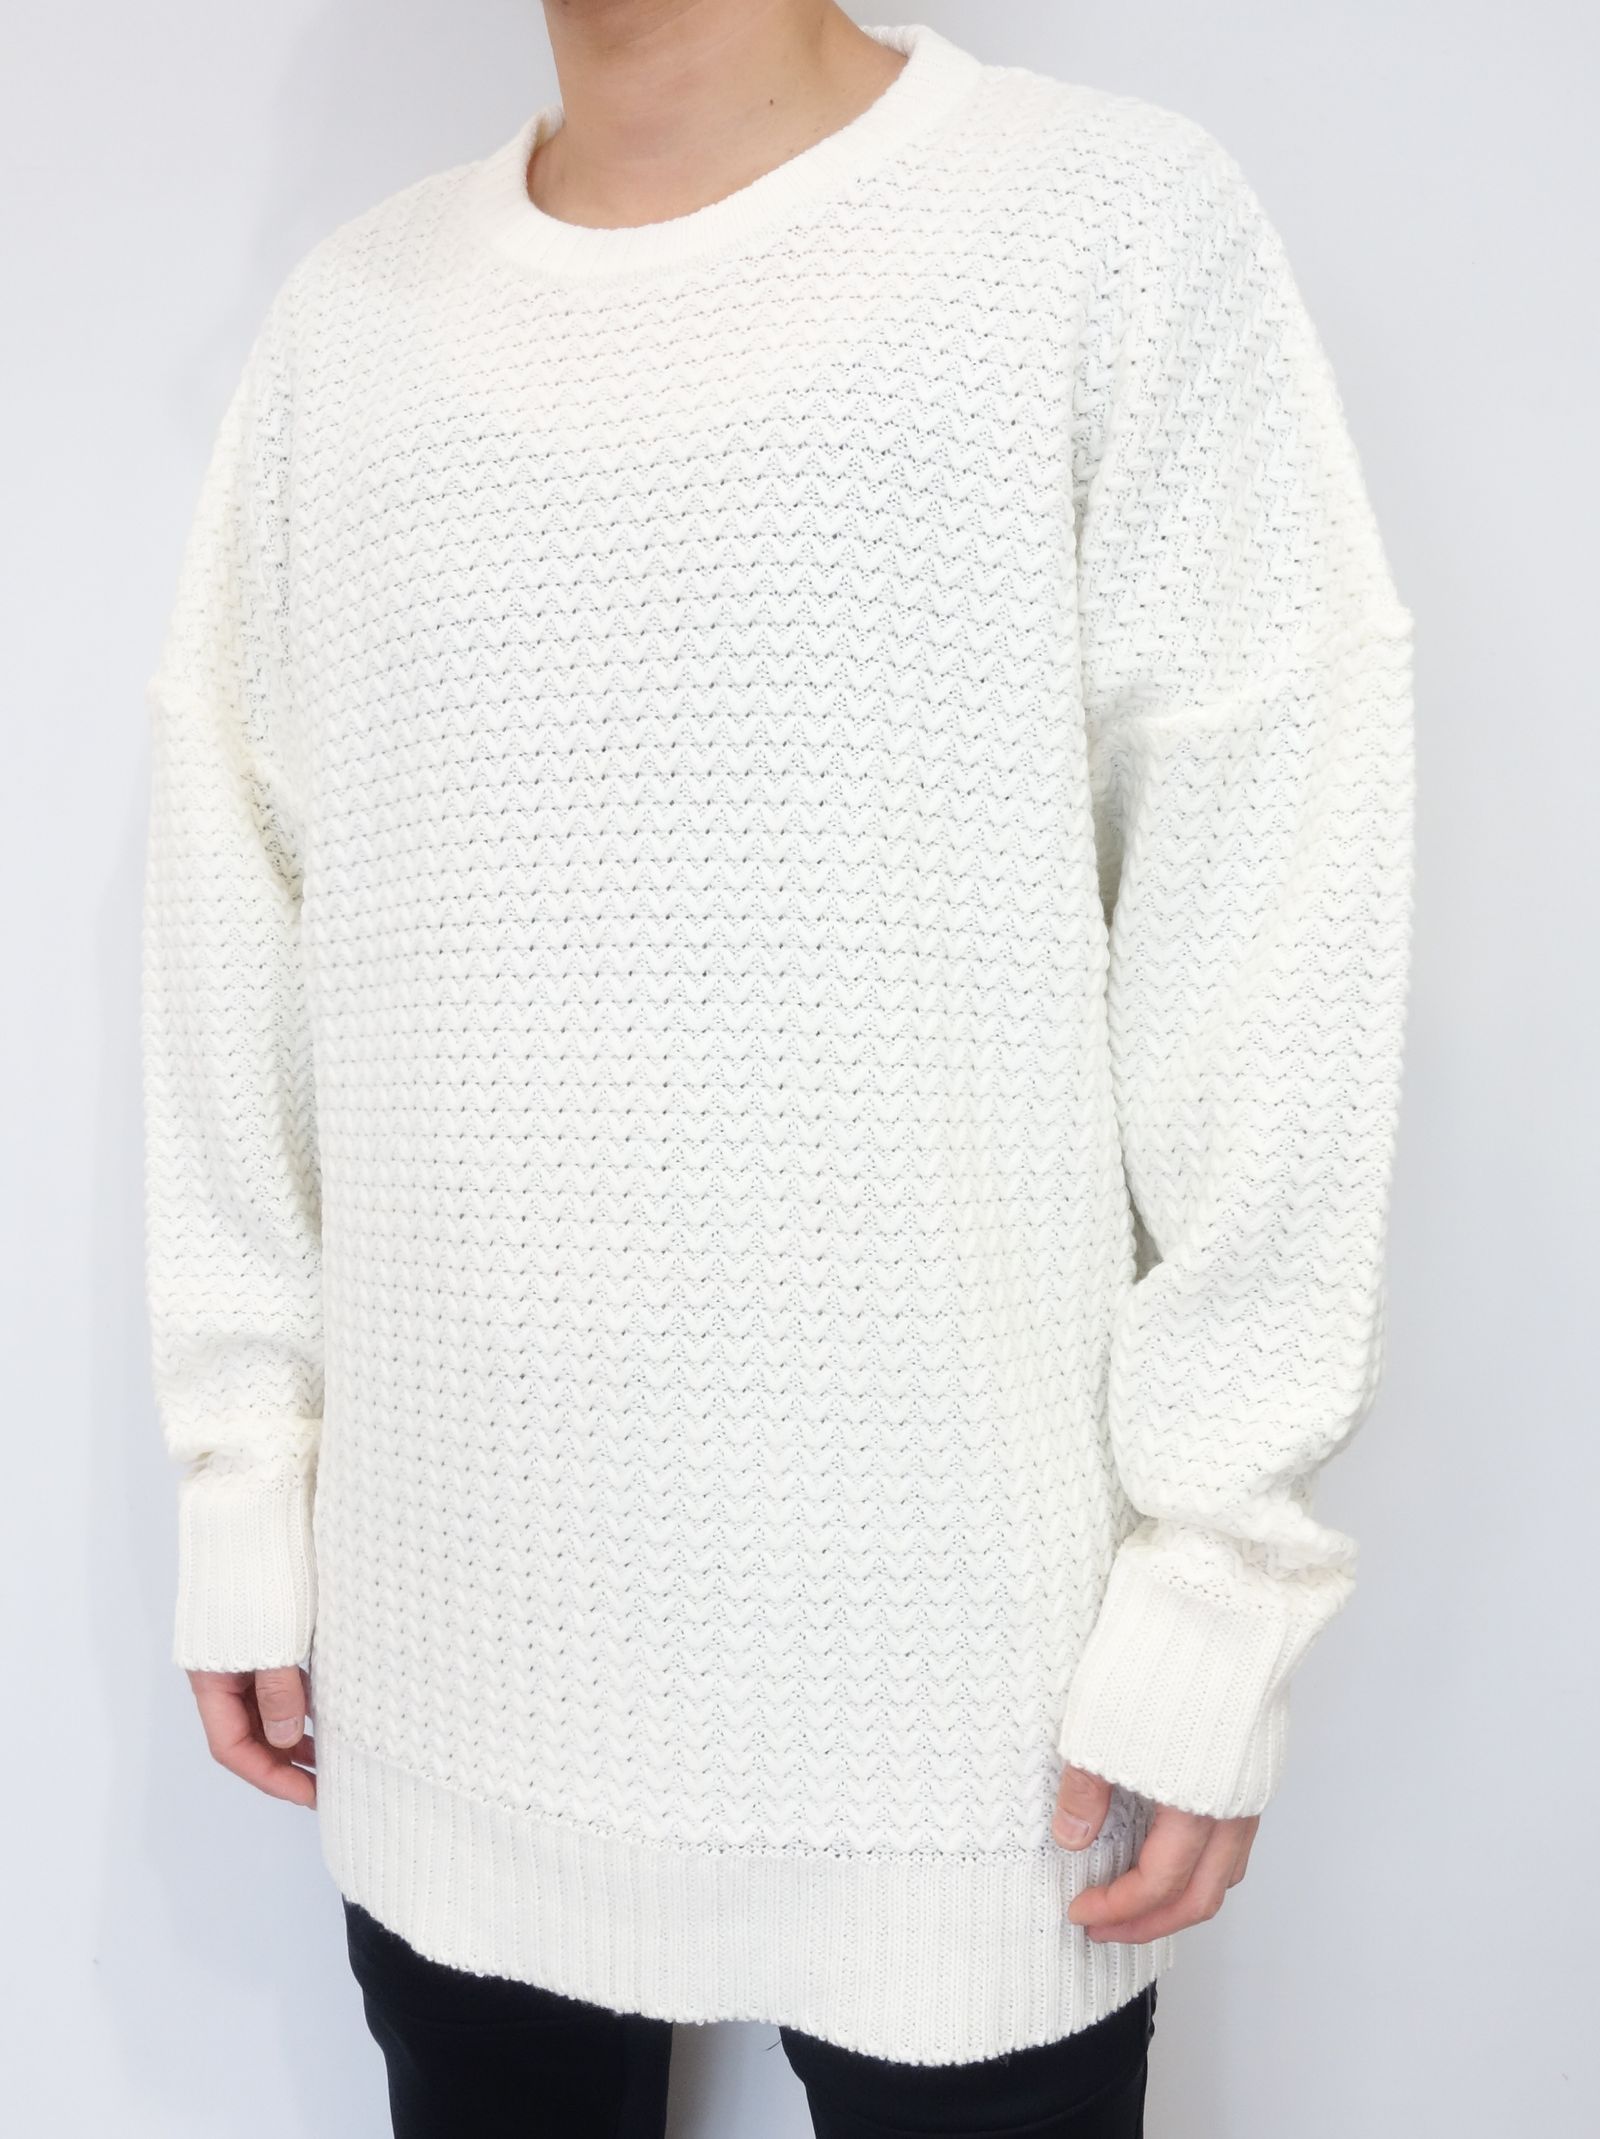 RESOUND CLOTHING - WEAVING STITCH LOOSE SWEATER / RC14-K-002